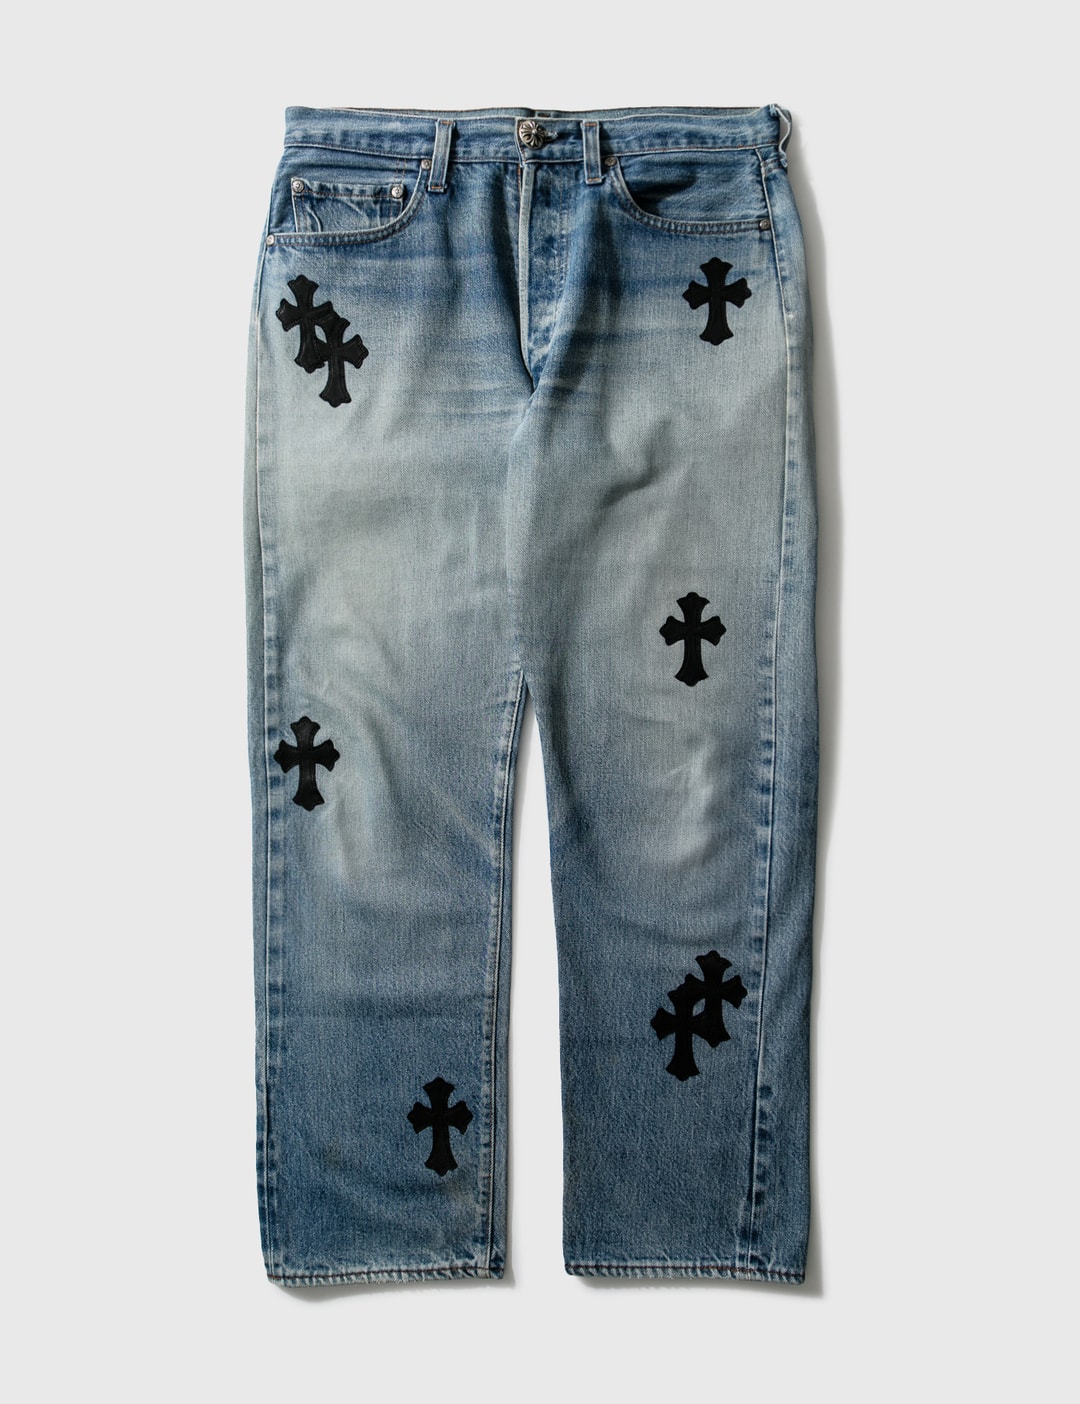 Levi's - Chrome Hearts X Levis Jeans | HBX - Globally Curated Fashion and  Lifestyle by Hypebeast